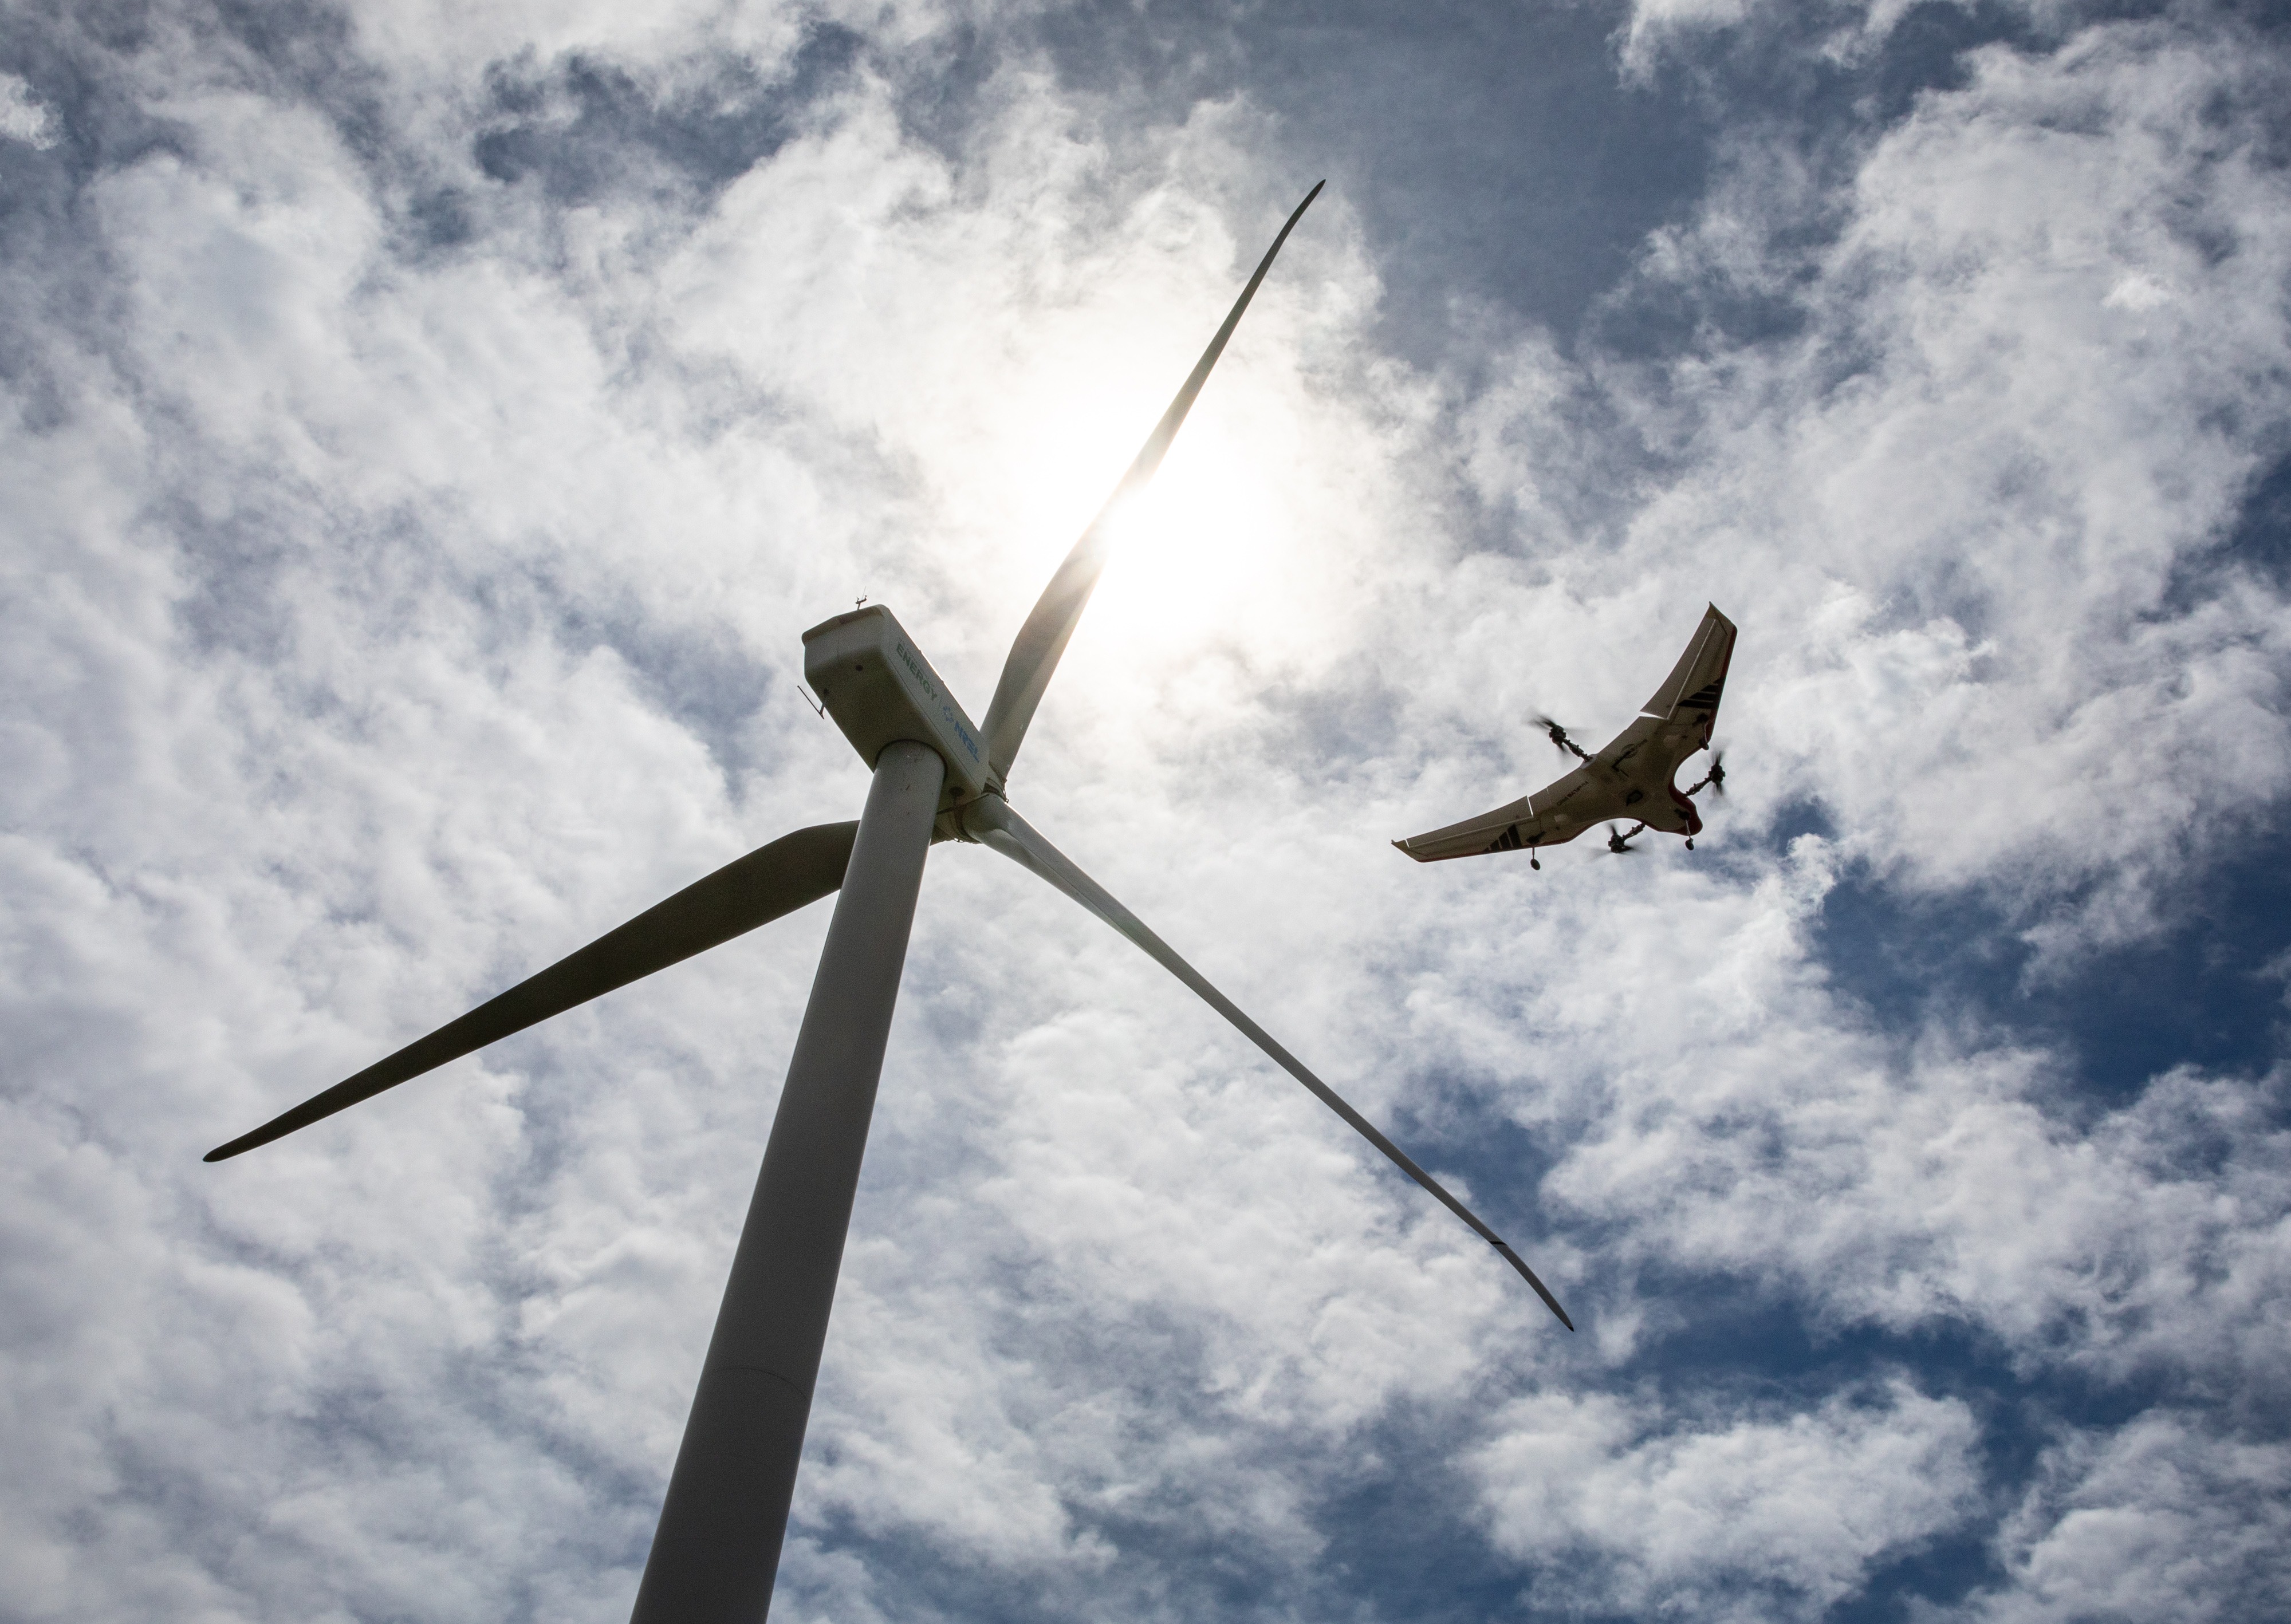 An unmanned aircraft flies over a wind turbine as viewed from below.